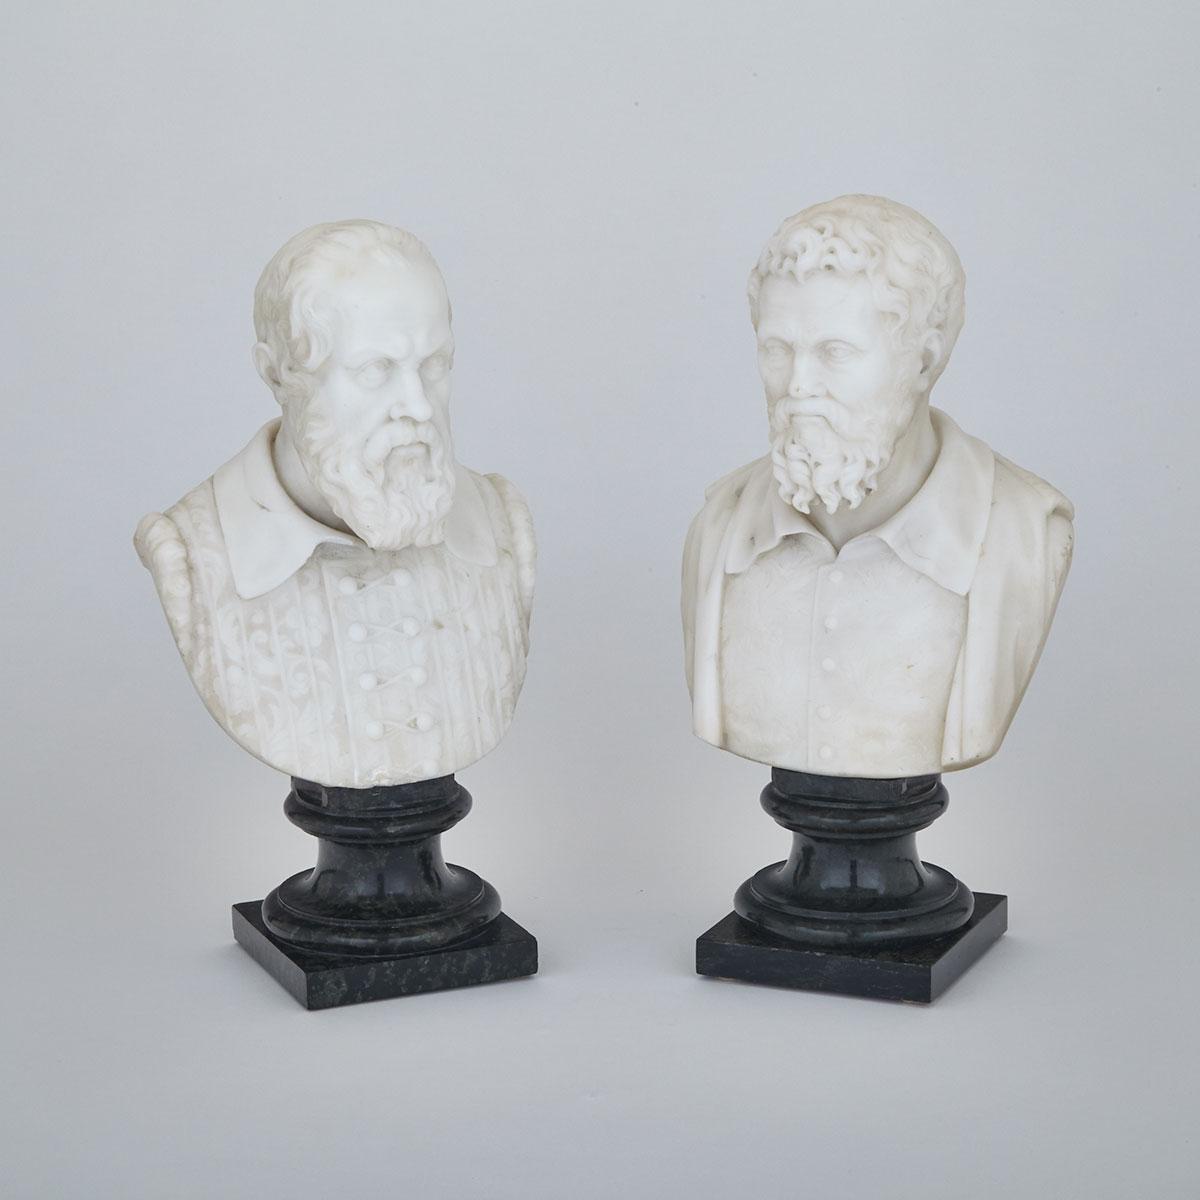 Pair of Late Victorian White Marble Busts, 19th century